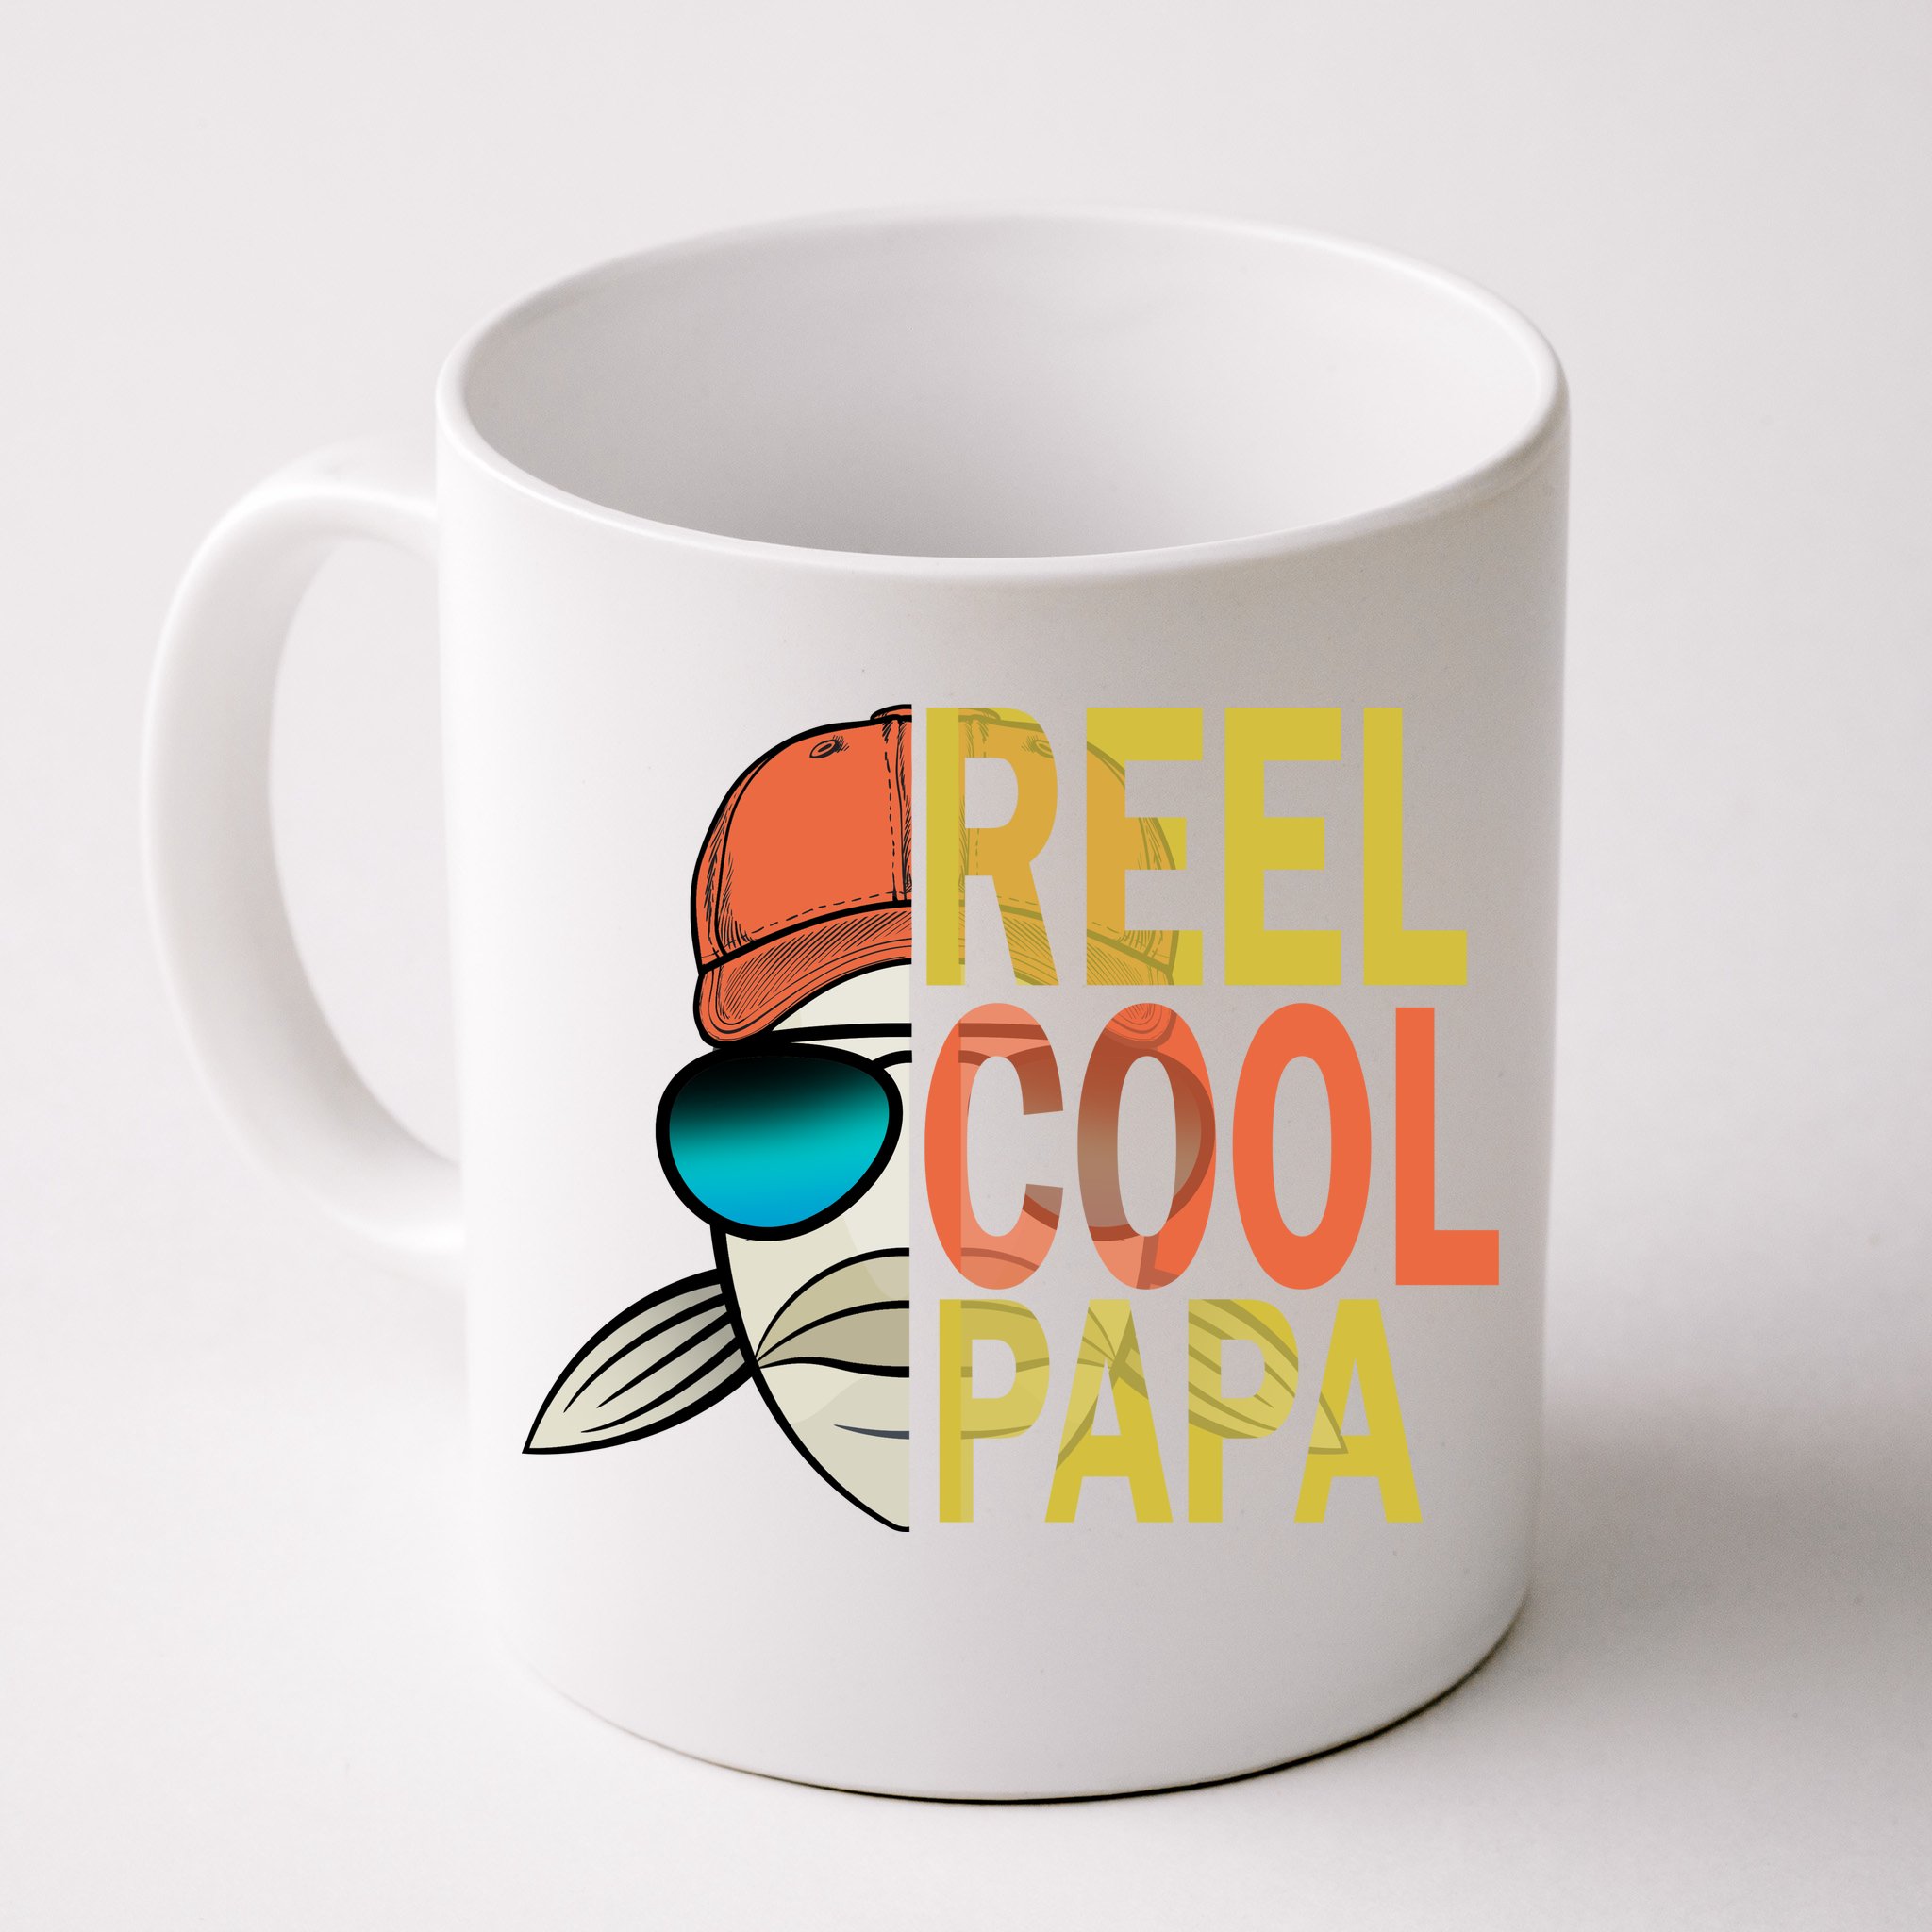 https://images3.teeshirtpalace.com/images/productImages/reel-cool-fishing-papa--white-cfm-front.jpg